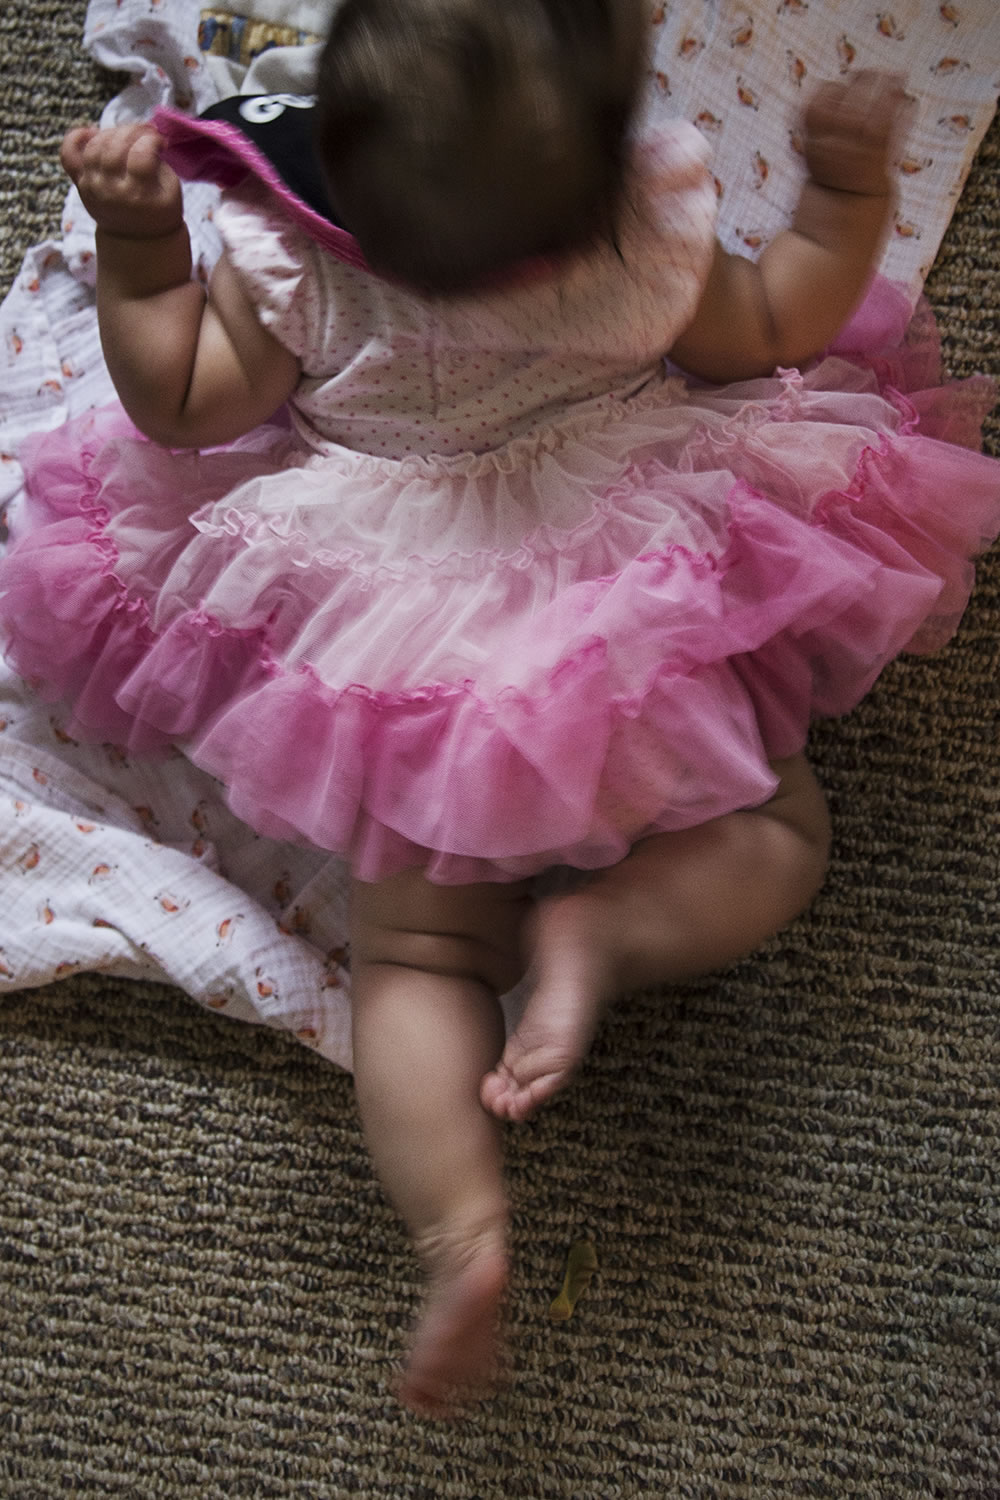 Baby in her first party dress, giving belly dancing a new definition.   